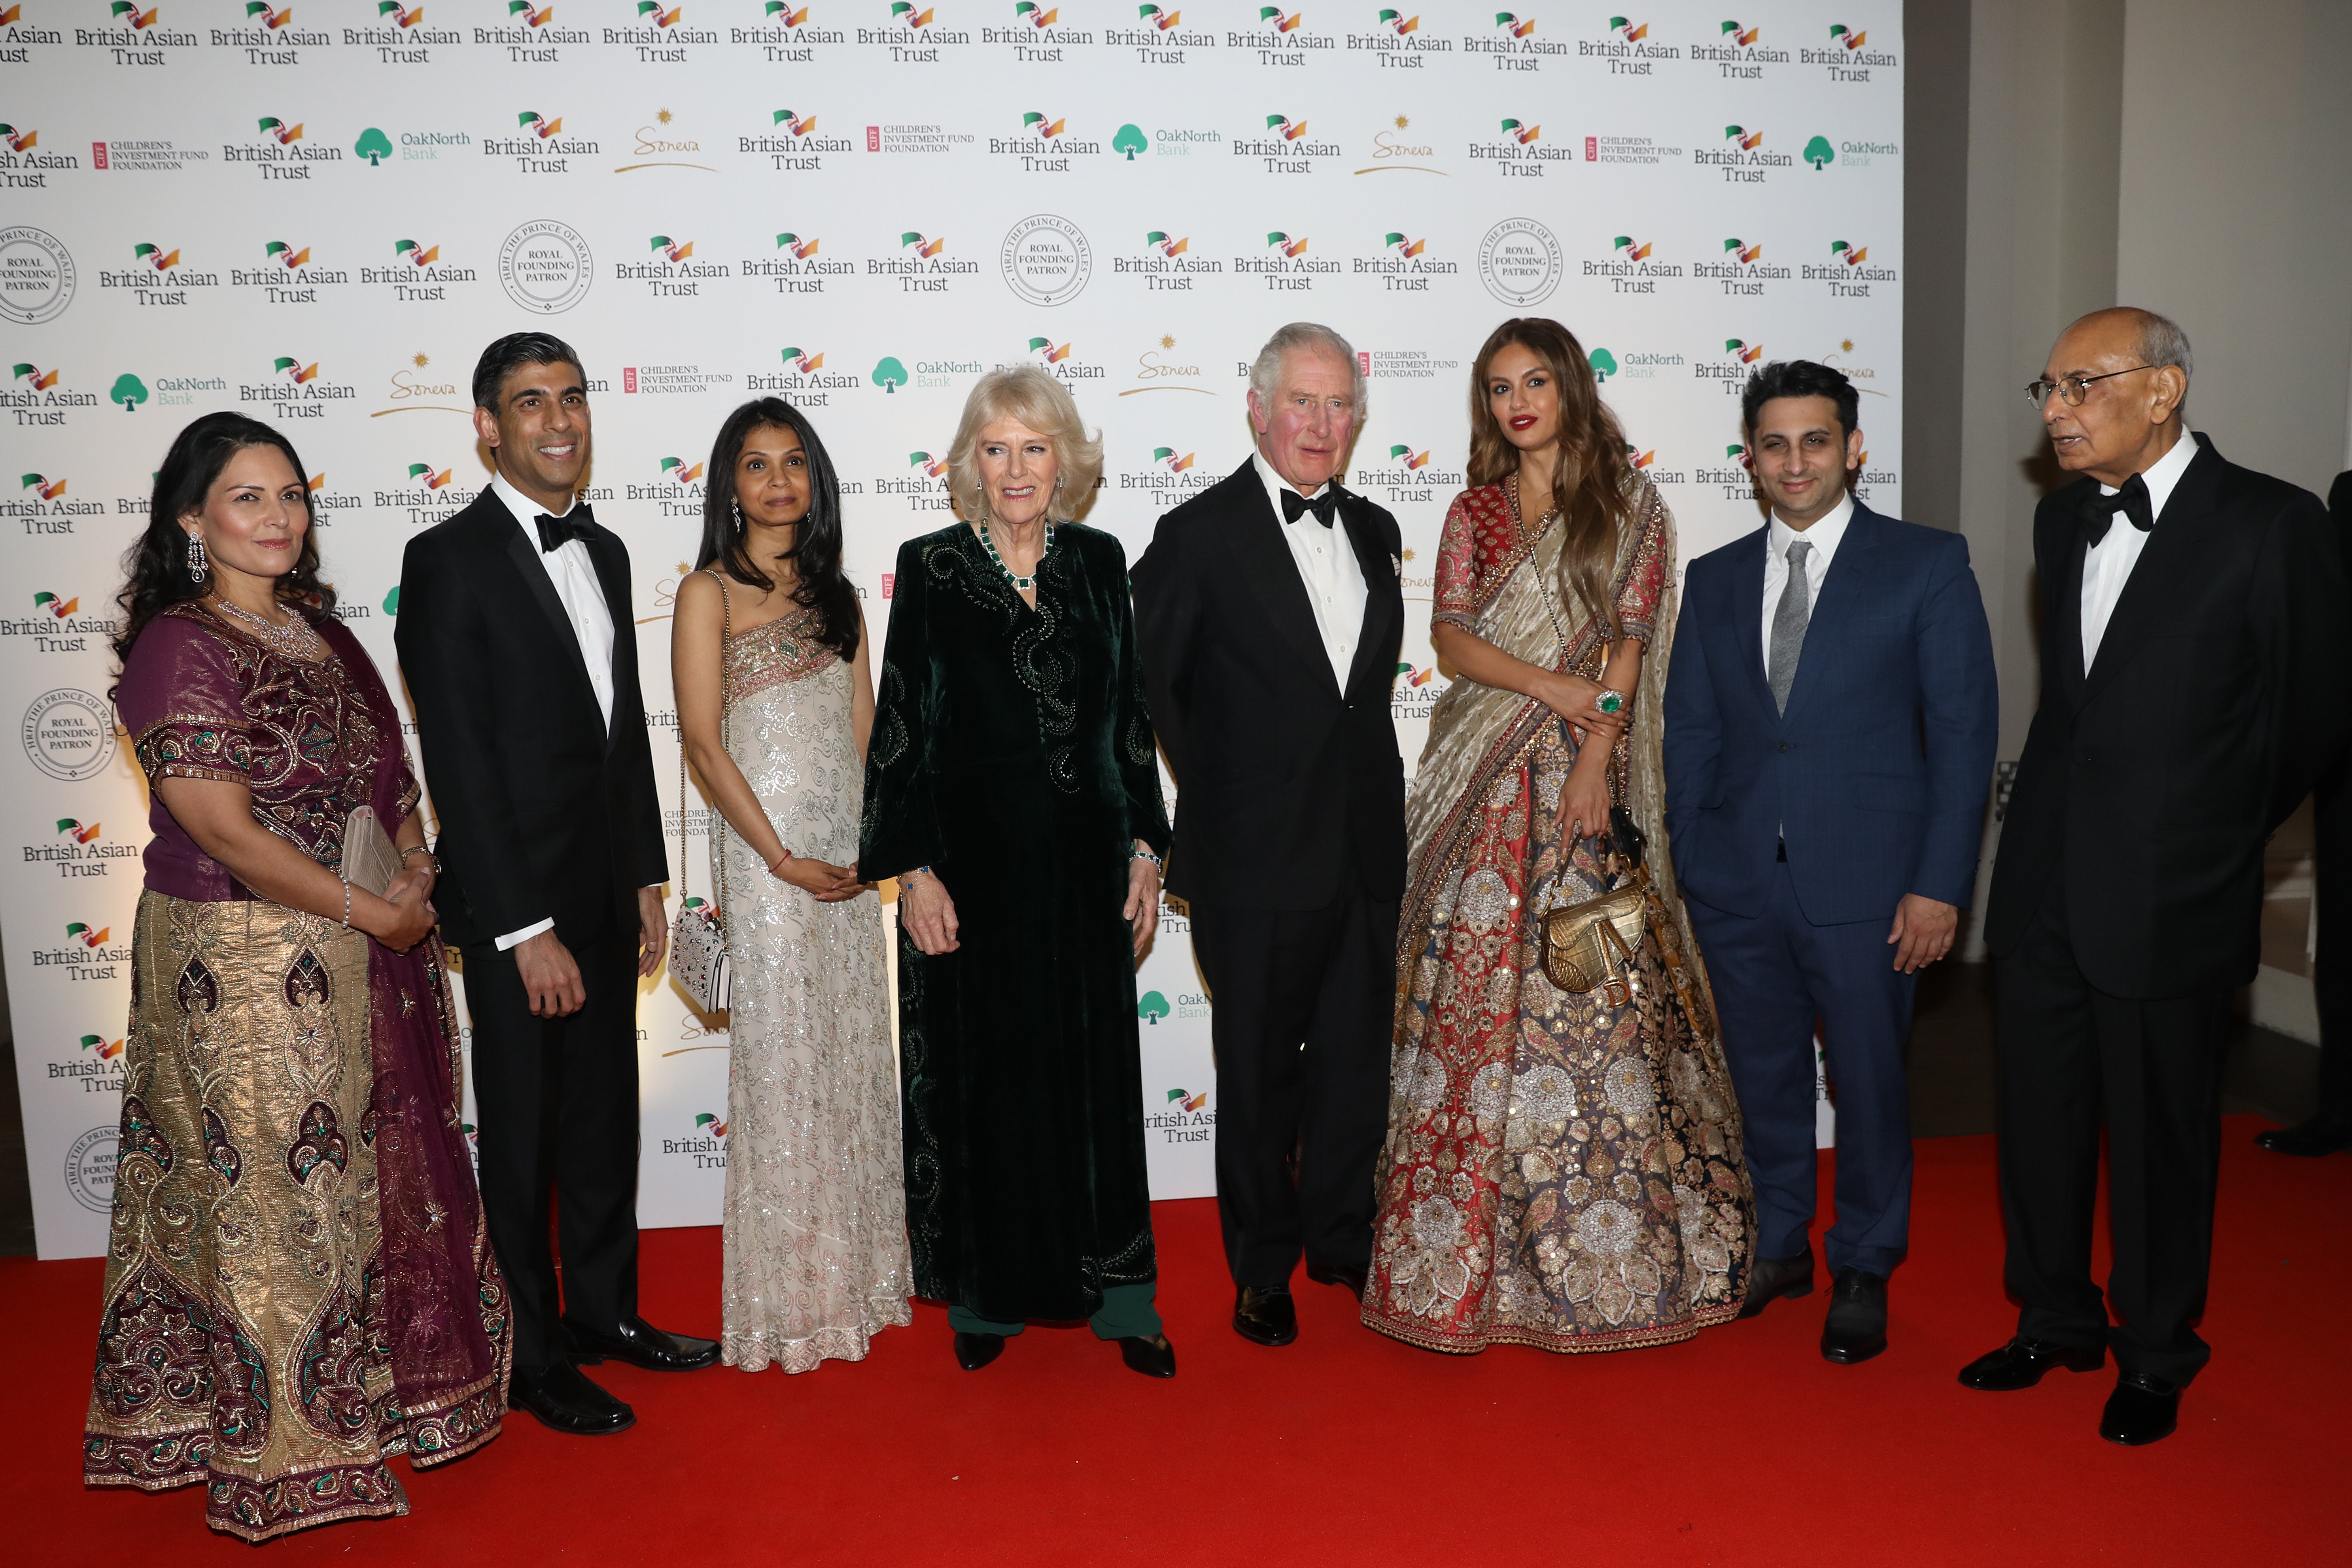 Charles and Camilla with guests including Priti Patel and Rishi Sunak on Wednesday evening (Tristan Fewings/PA)